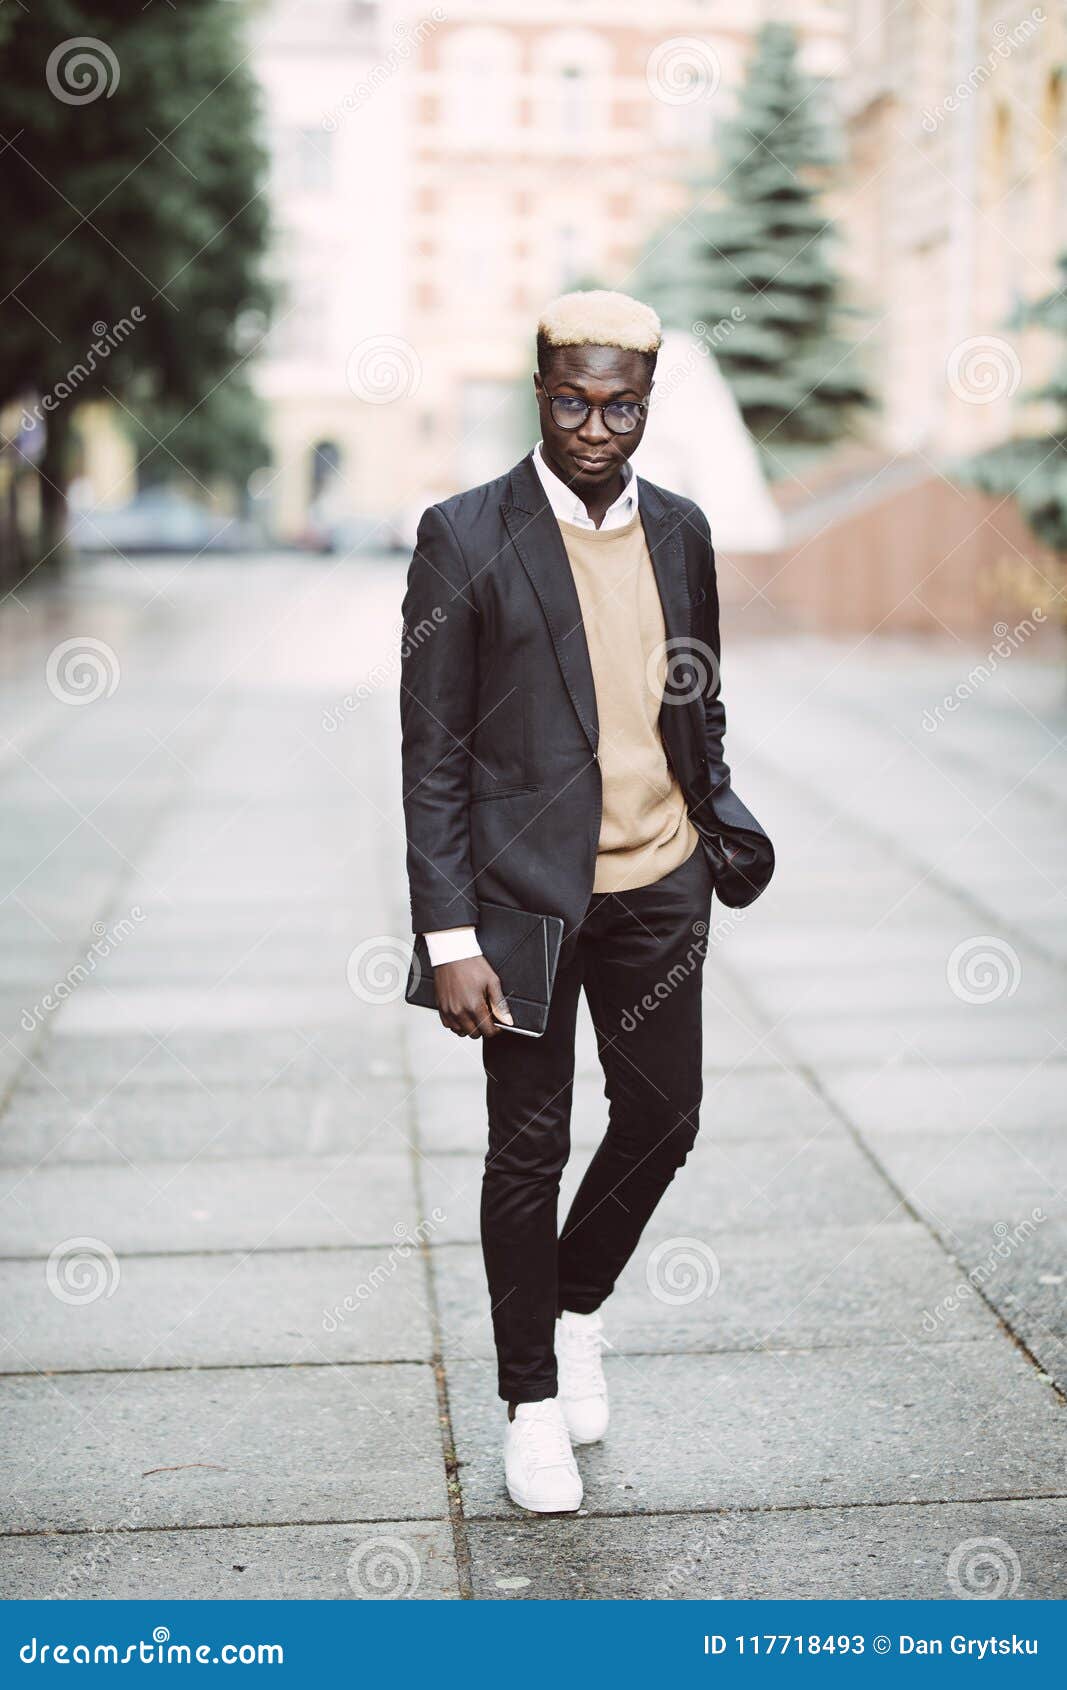 Full Length Portrait of Young African Businessman Walking in the City ...